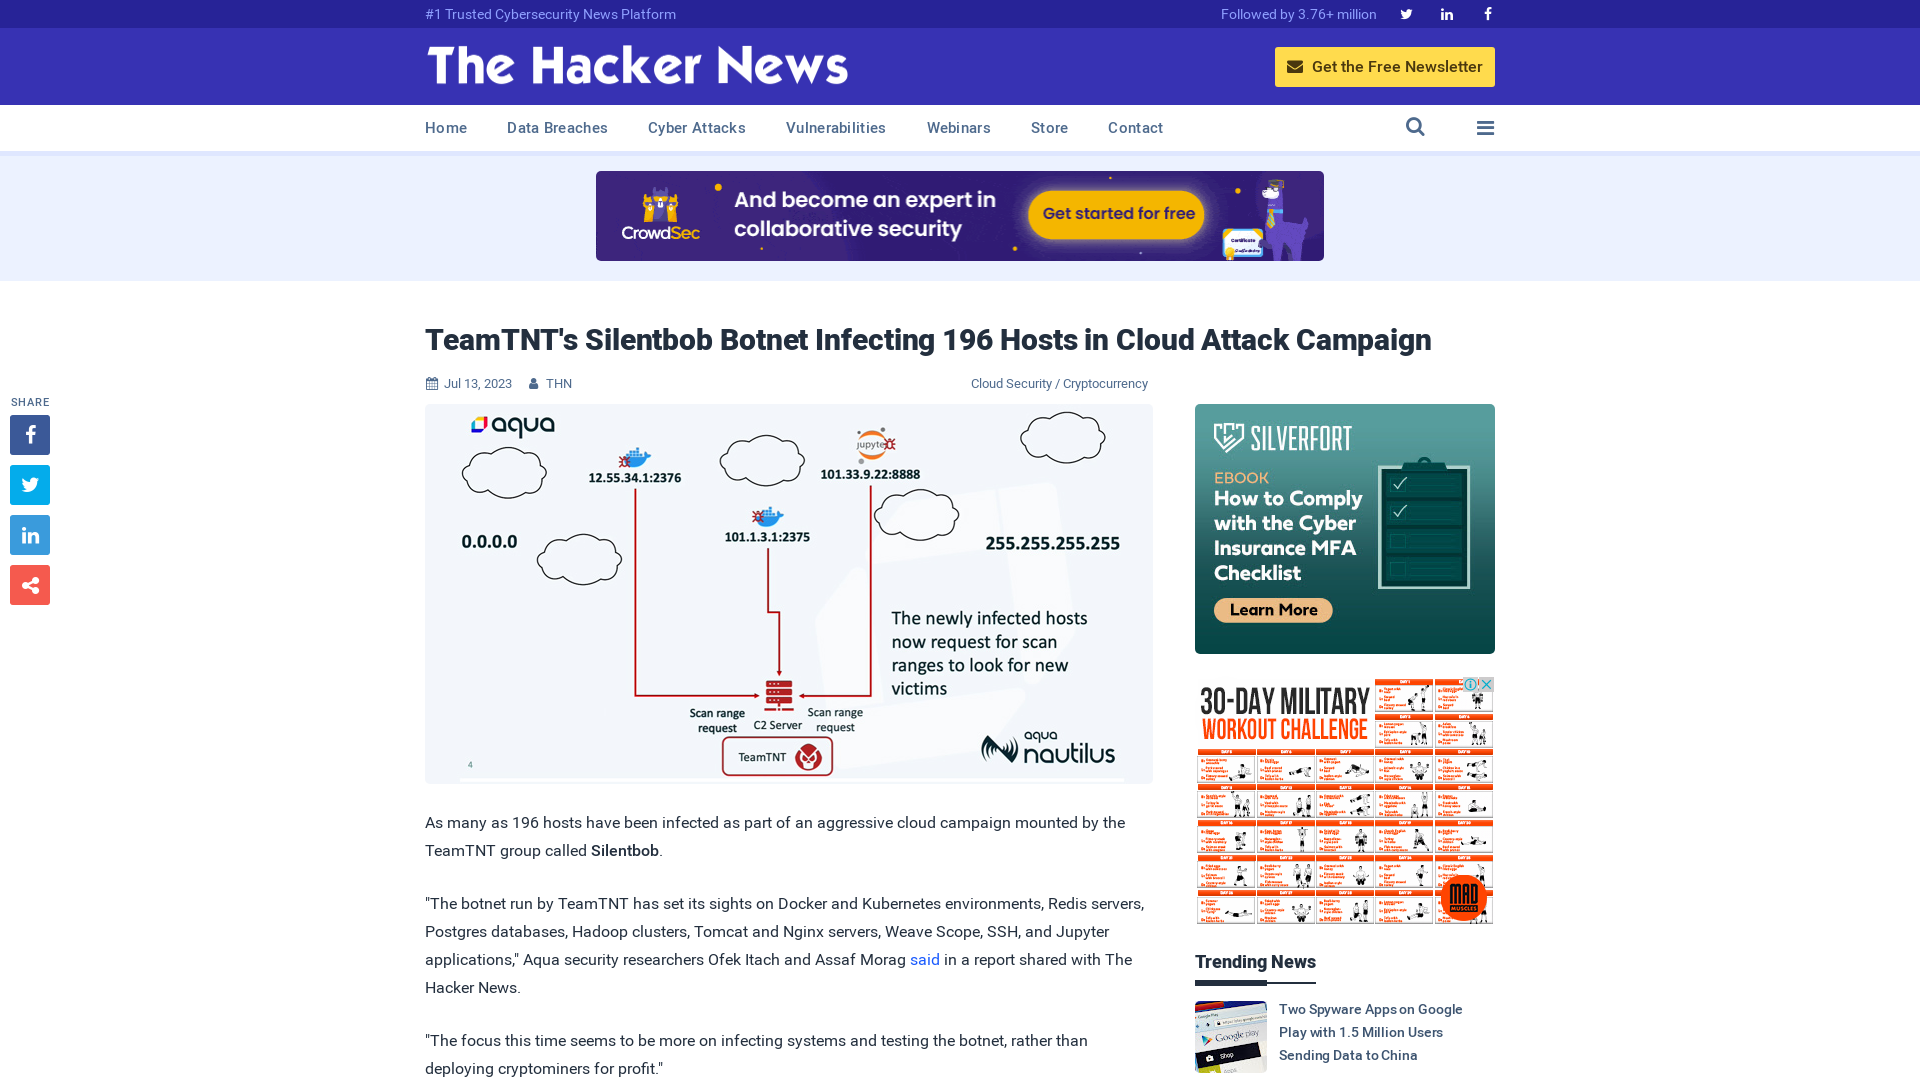 TeamTNT's Silentbob Botnet Infecting 196 Hosts in Cloud Attack Campaign